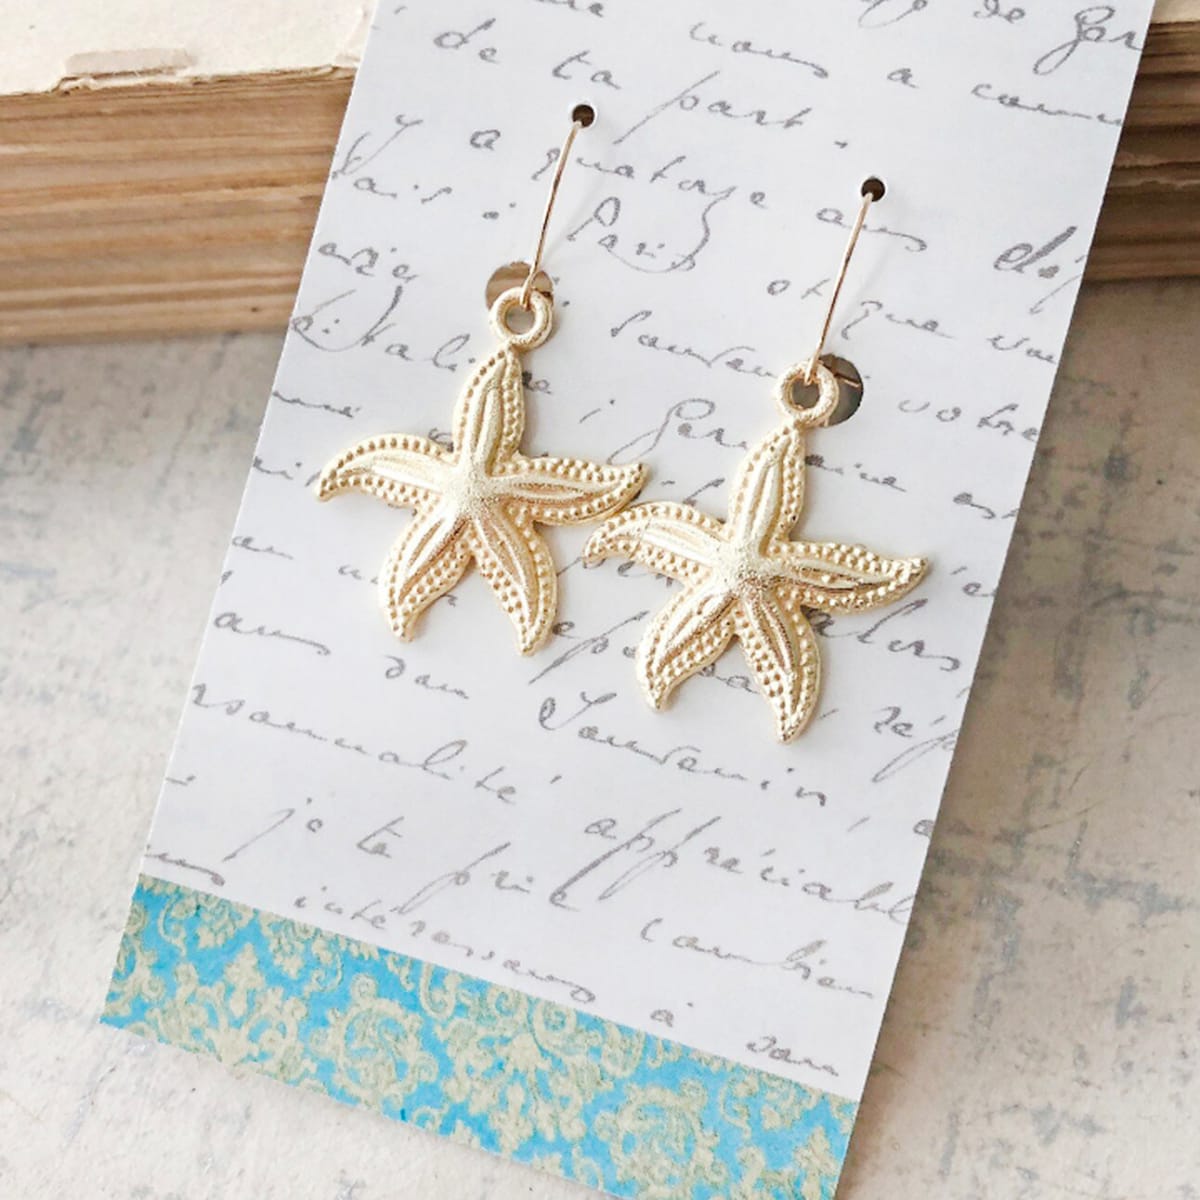 Gold Starfish Earrings by Kayte Price 